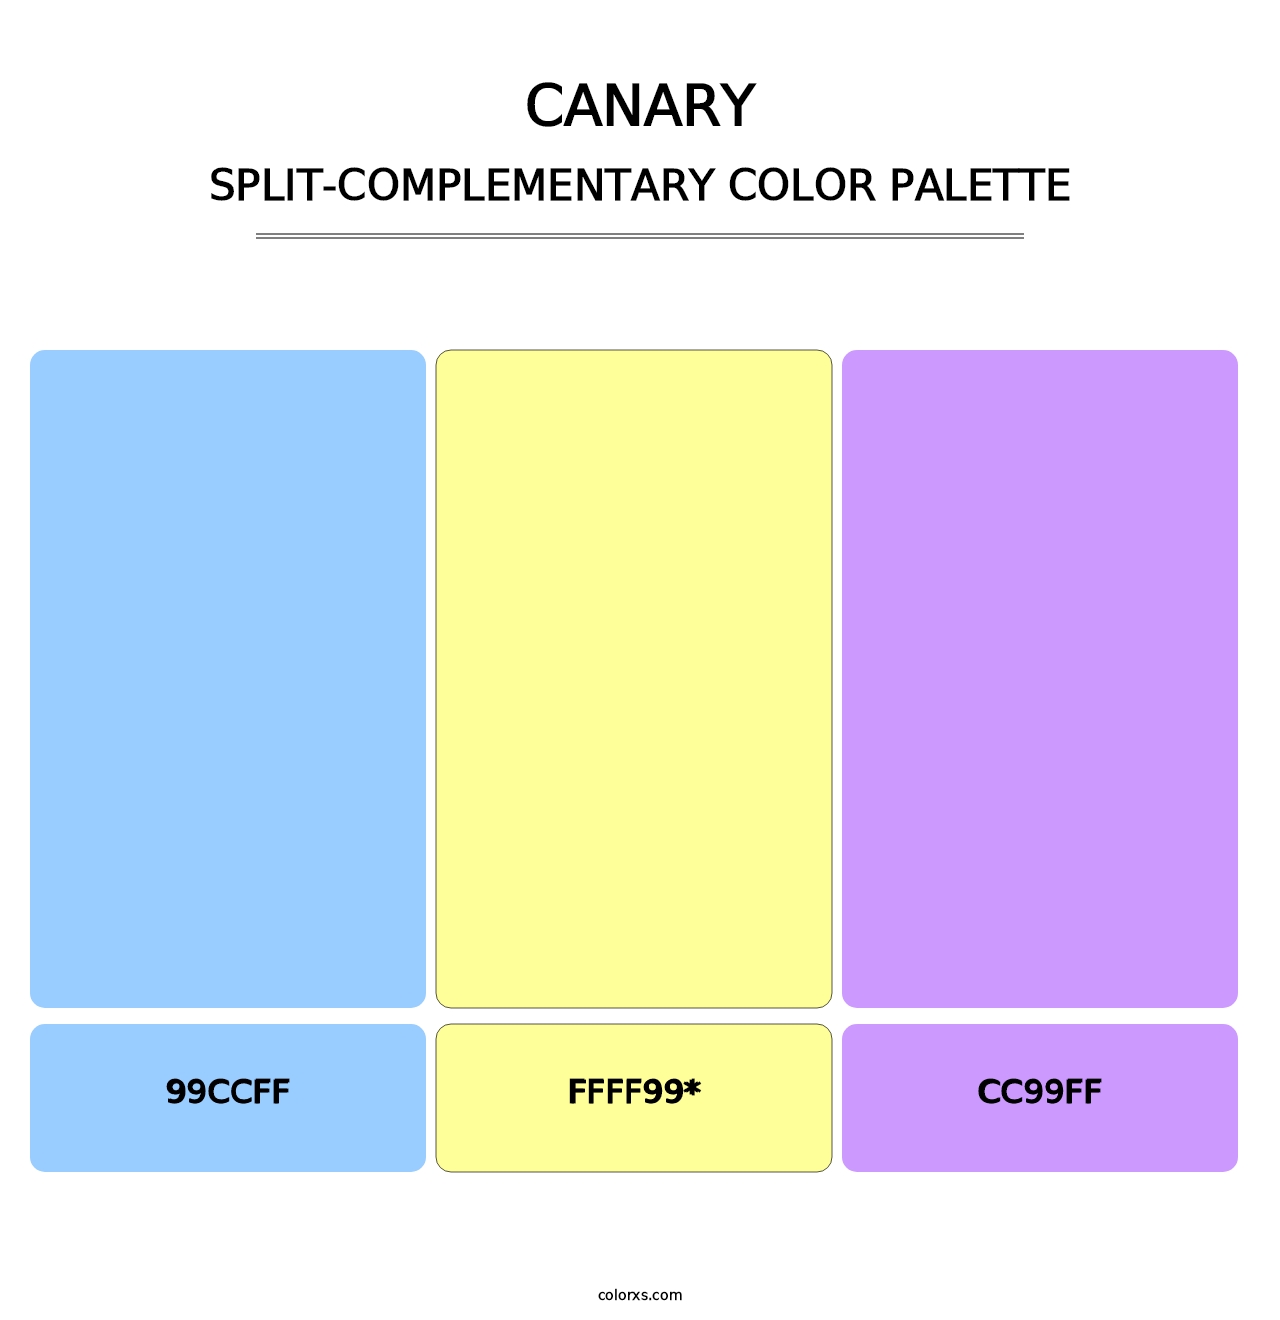 Canary - Split-Complementary Color Palette